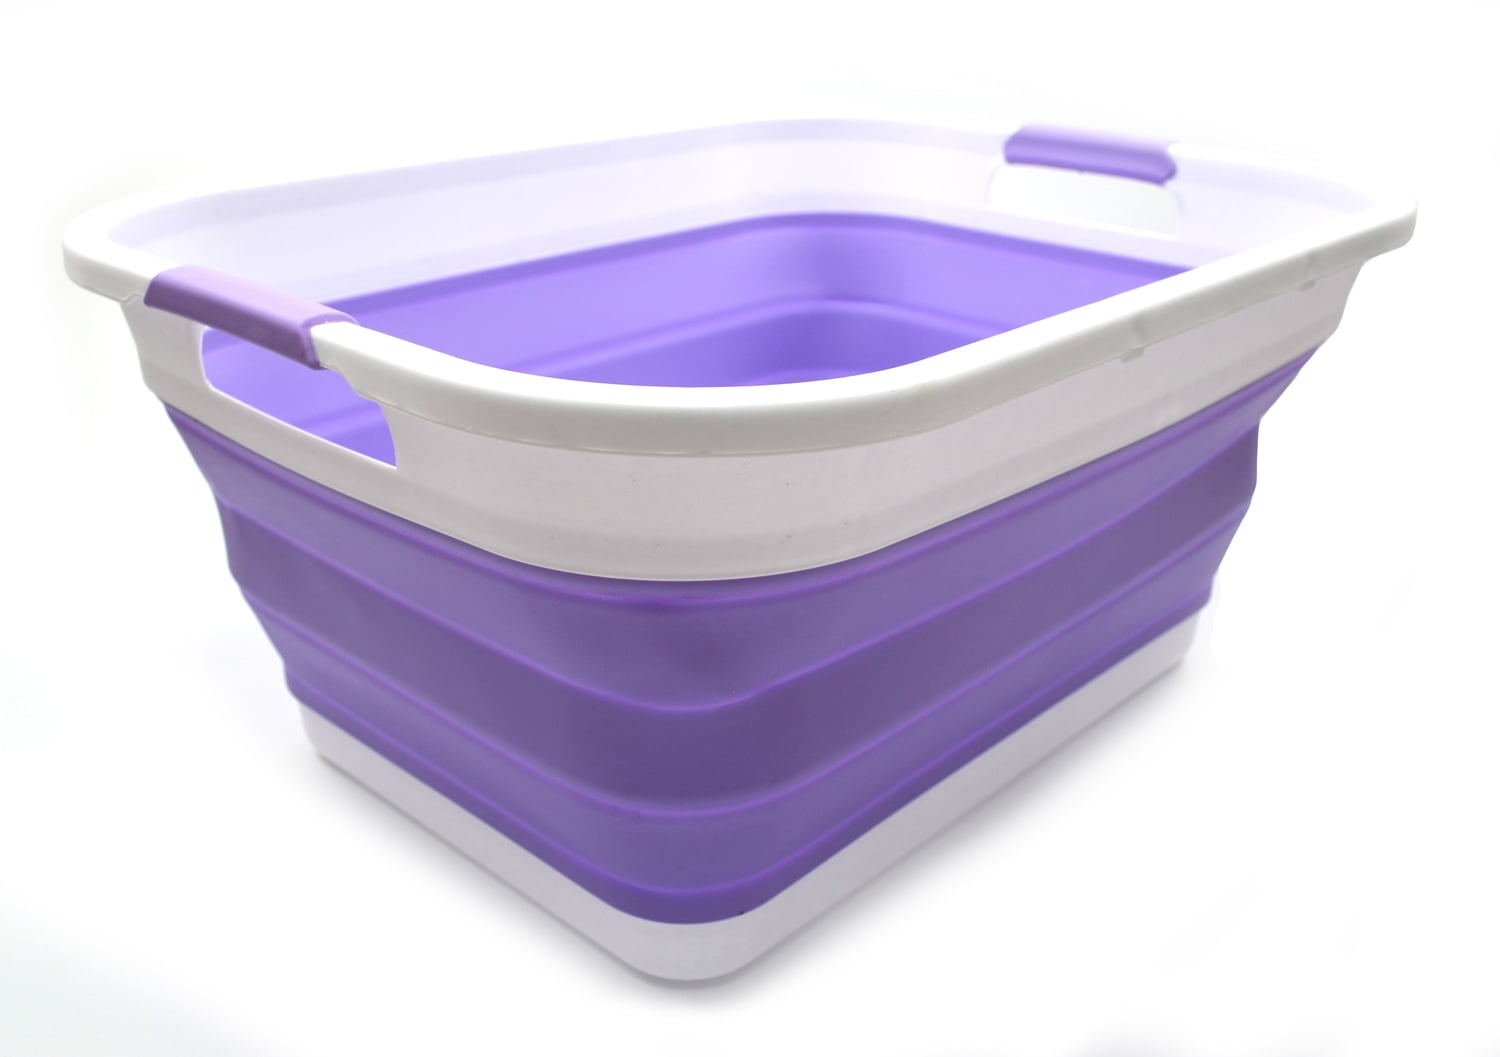 Collapsible Laundry Basket/ Storage Container/Organizer Portable Washing Tub